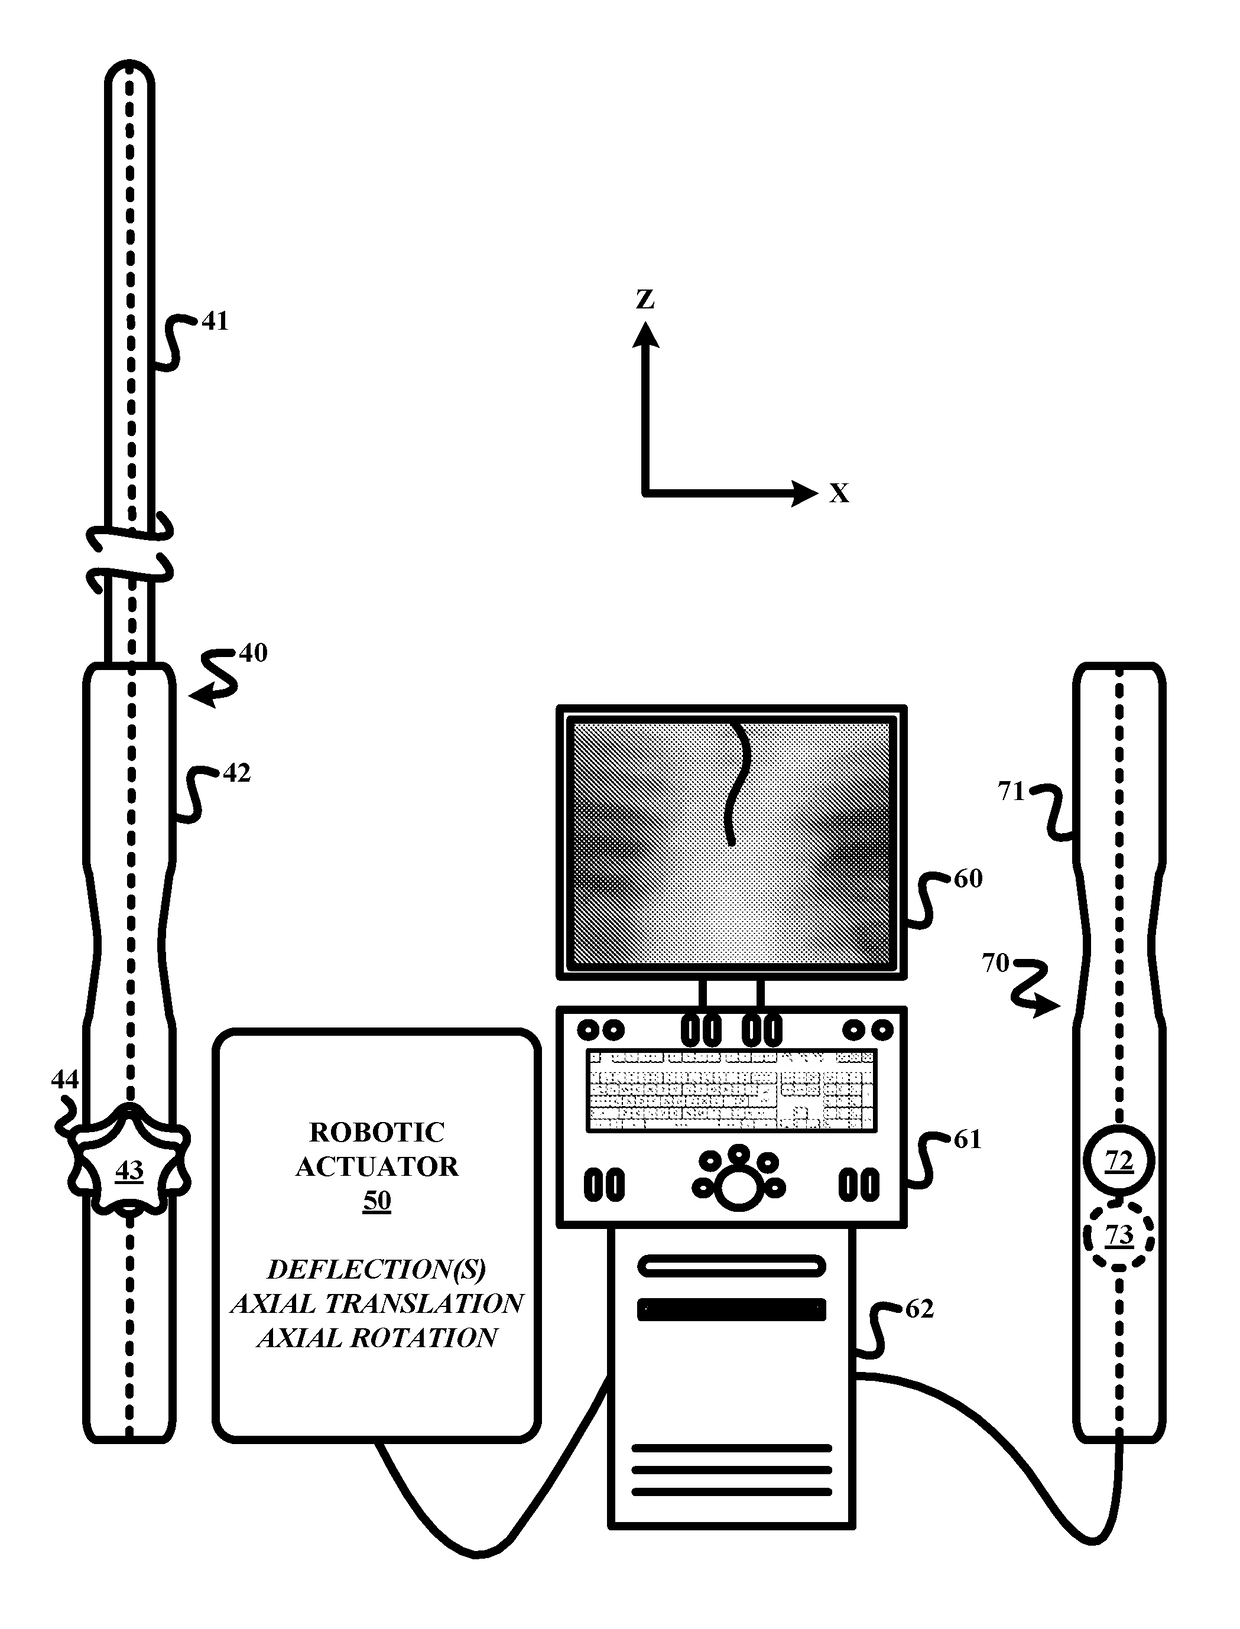 Remote robotic actuation of a transeopagel echocardiography probe